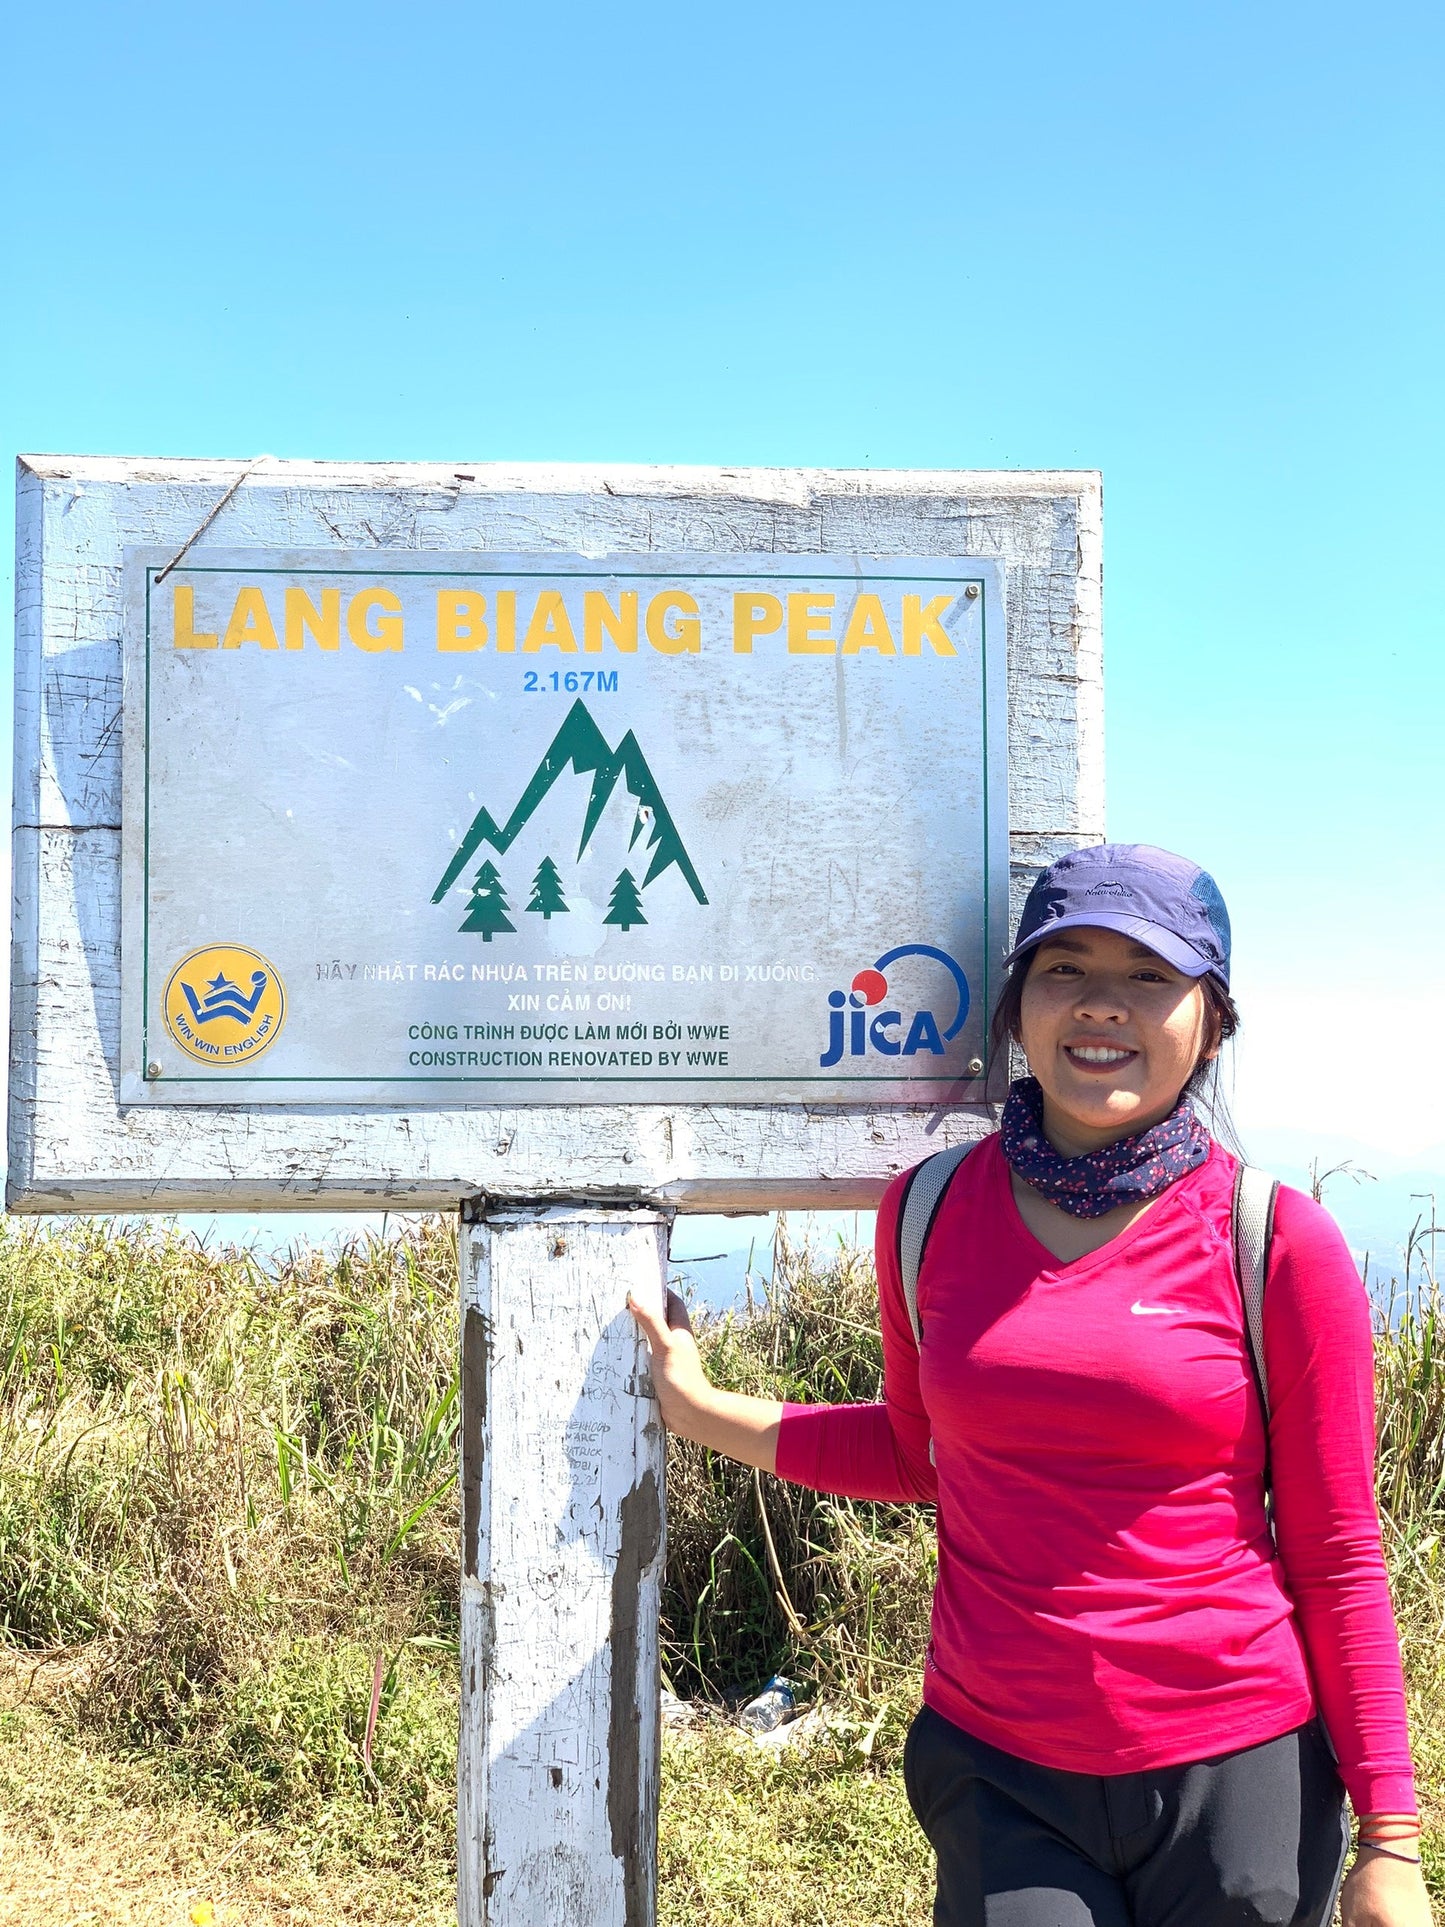 15BR: (2 DAYS) Mt. Langbiang (2167m): Conquering The Peak Of Dalat, Witnessing The Enveloping Mist